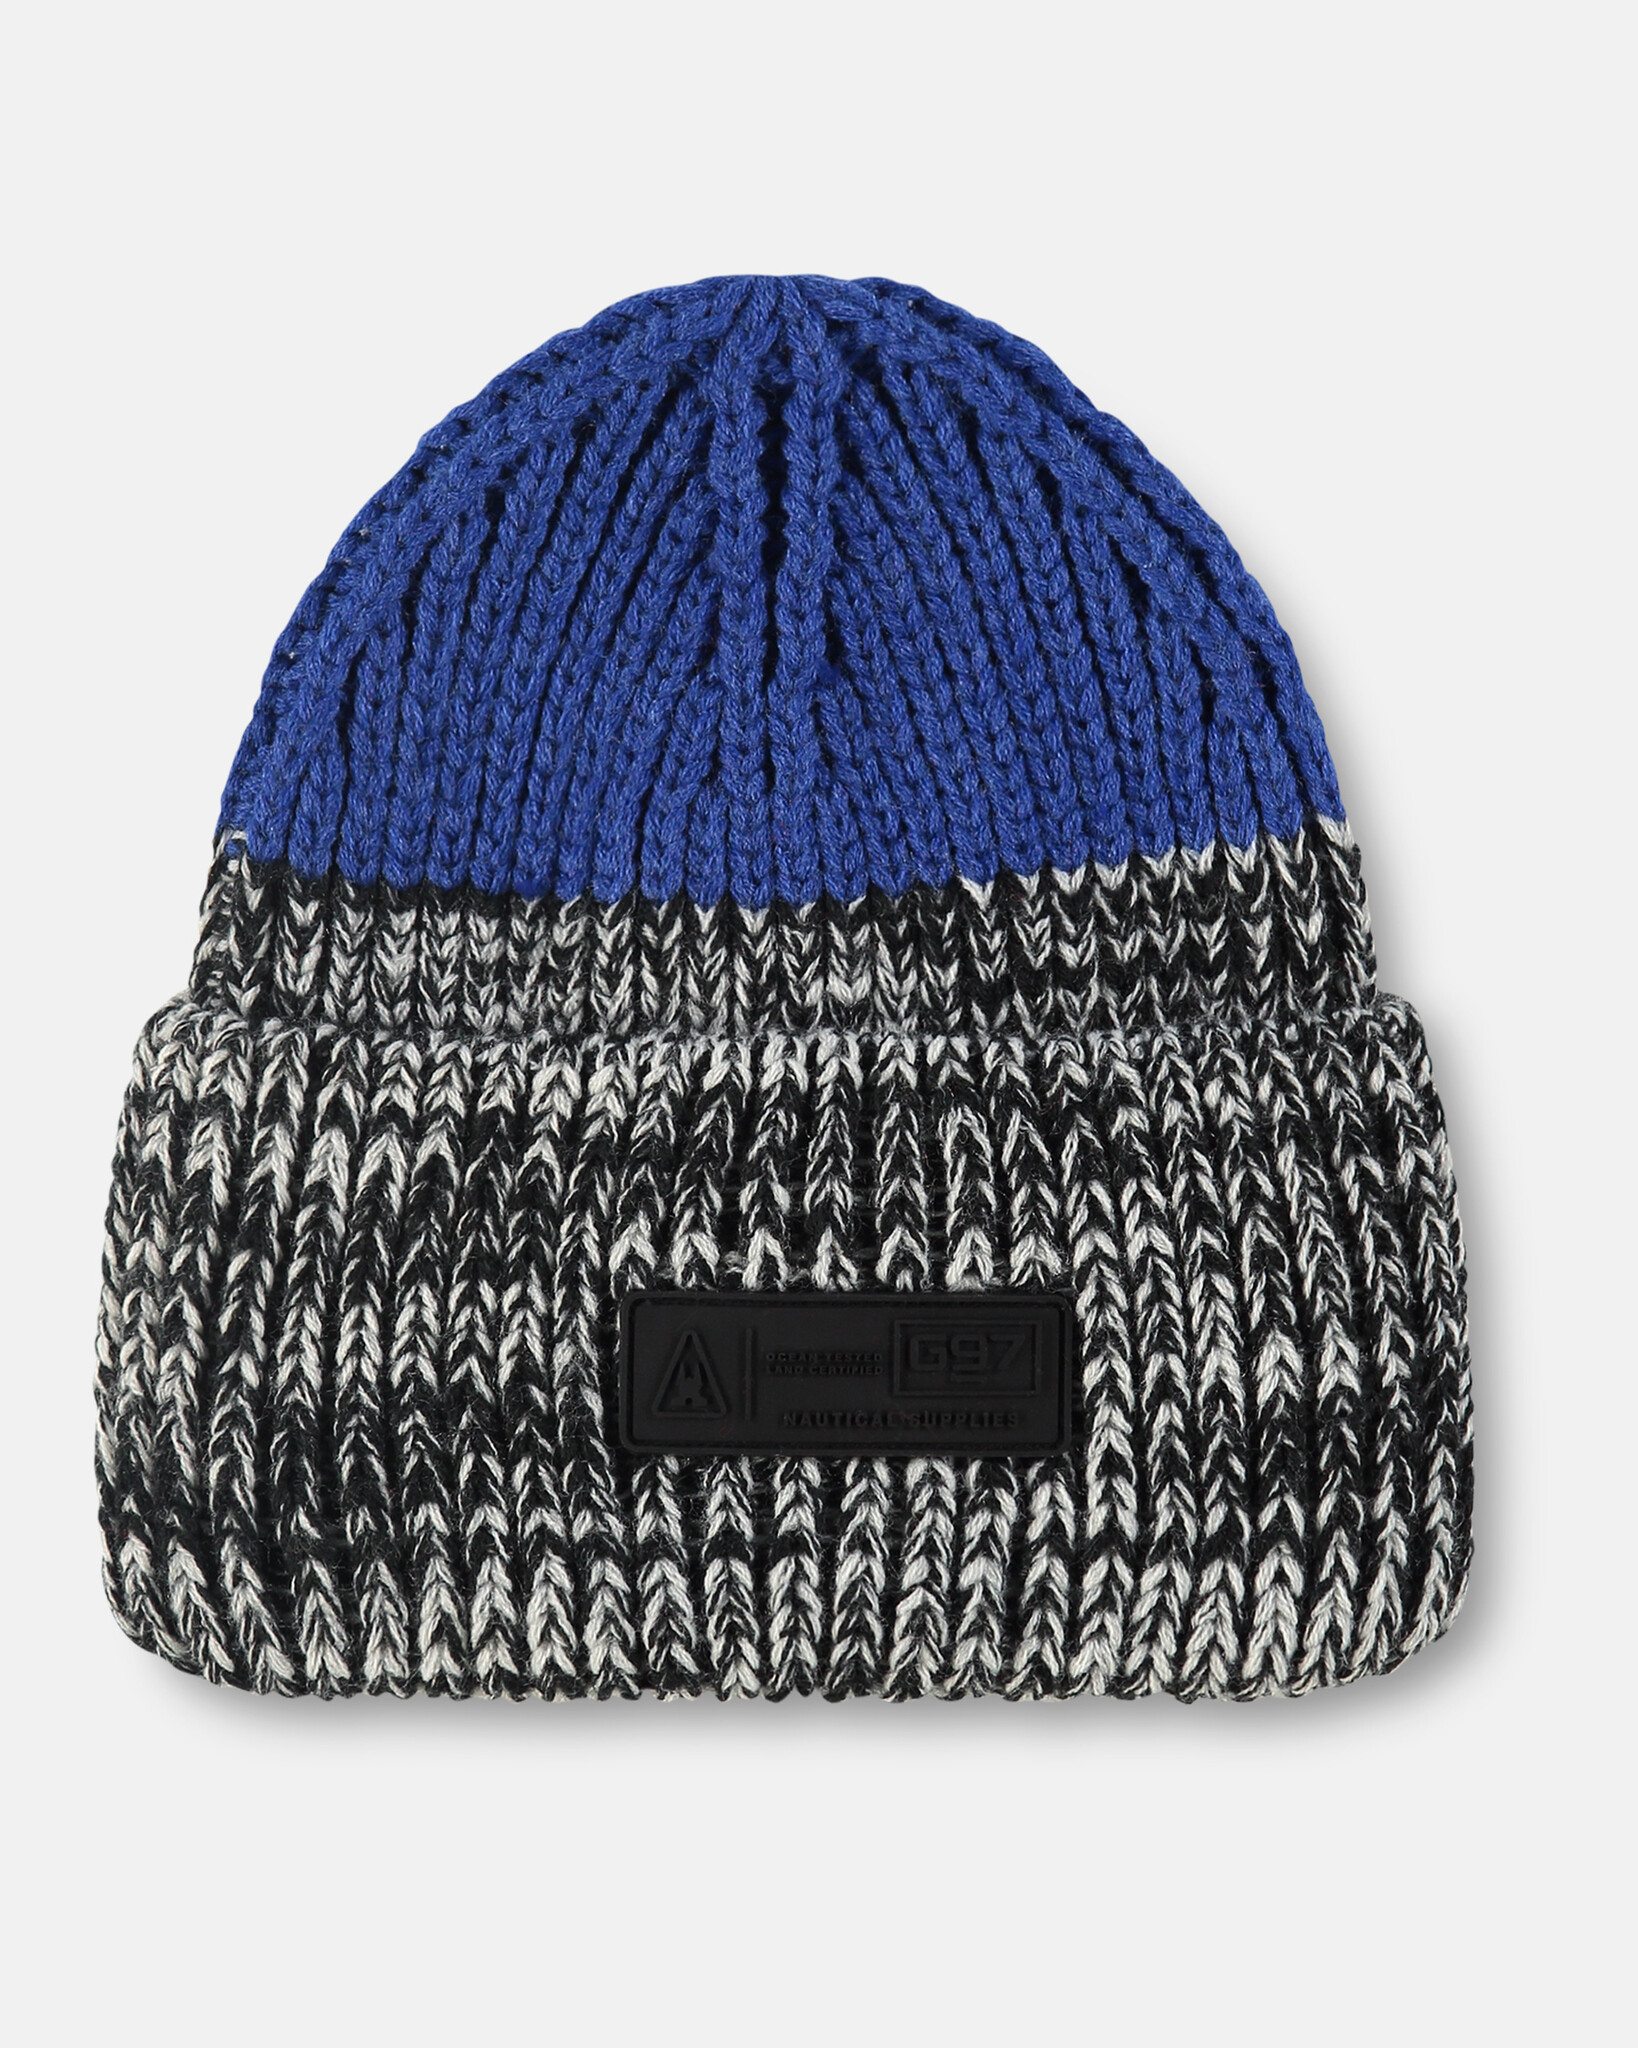 Heavy knitted 2-tone beanie made from sustainable Polylana® fiber mix